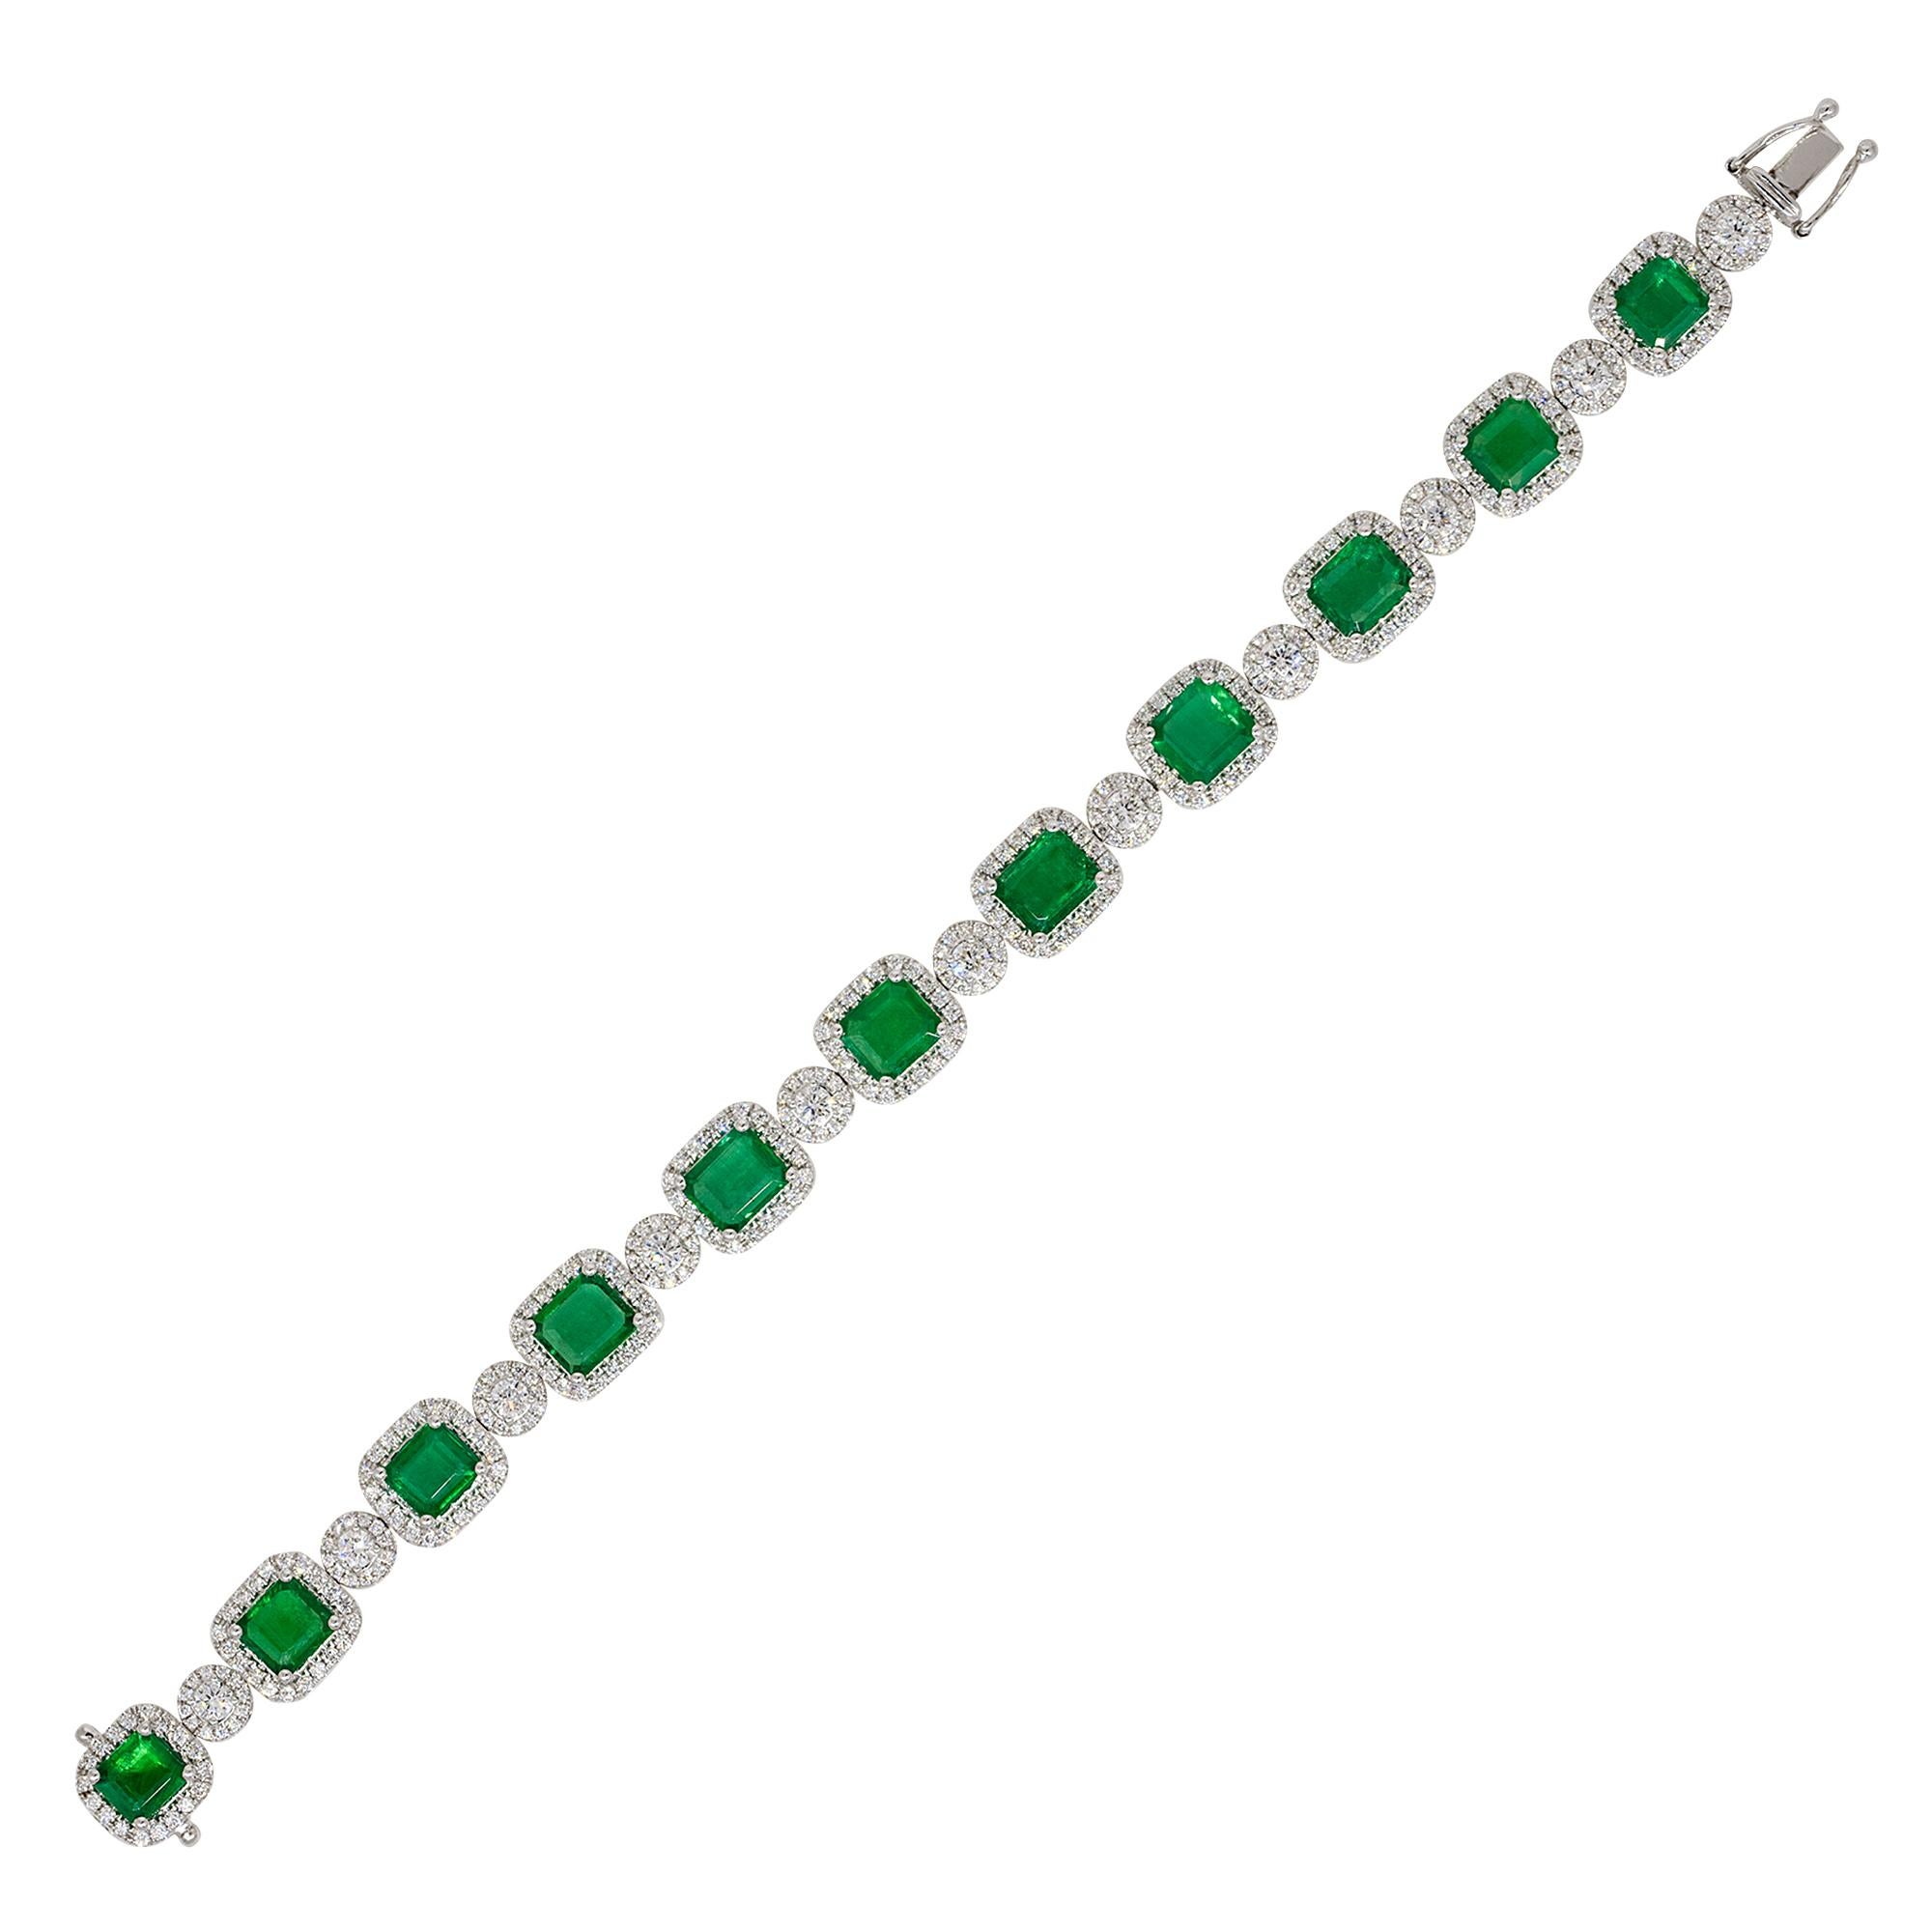 Material: 18k White gold
Diamond details: Approx. 3.17ctw of round cut diamonds. Diamonds are G/H in color and VS in clarity
Gemstone details: Approx. 10.40ctw of emerald gemstones.
Clasps: Tongue in box
Total Weight: 24.4g (15.7dwt)
Bracelet